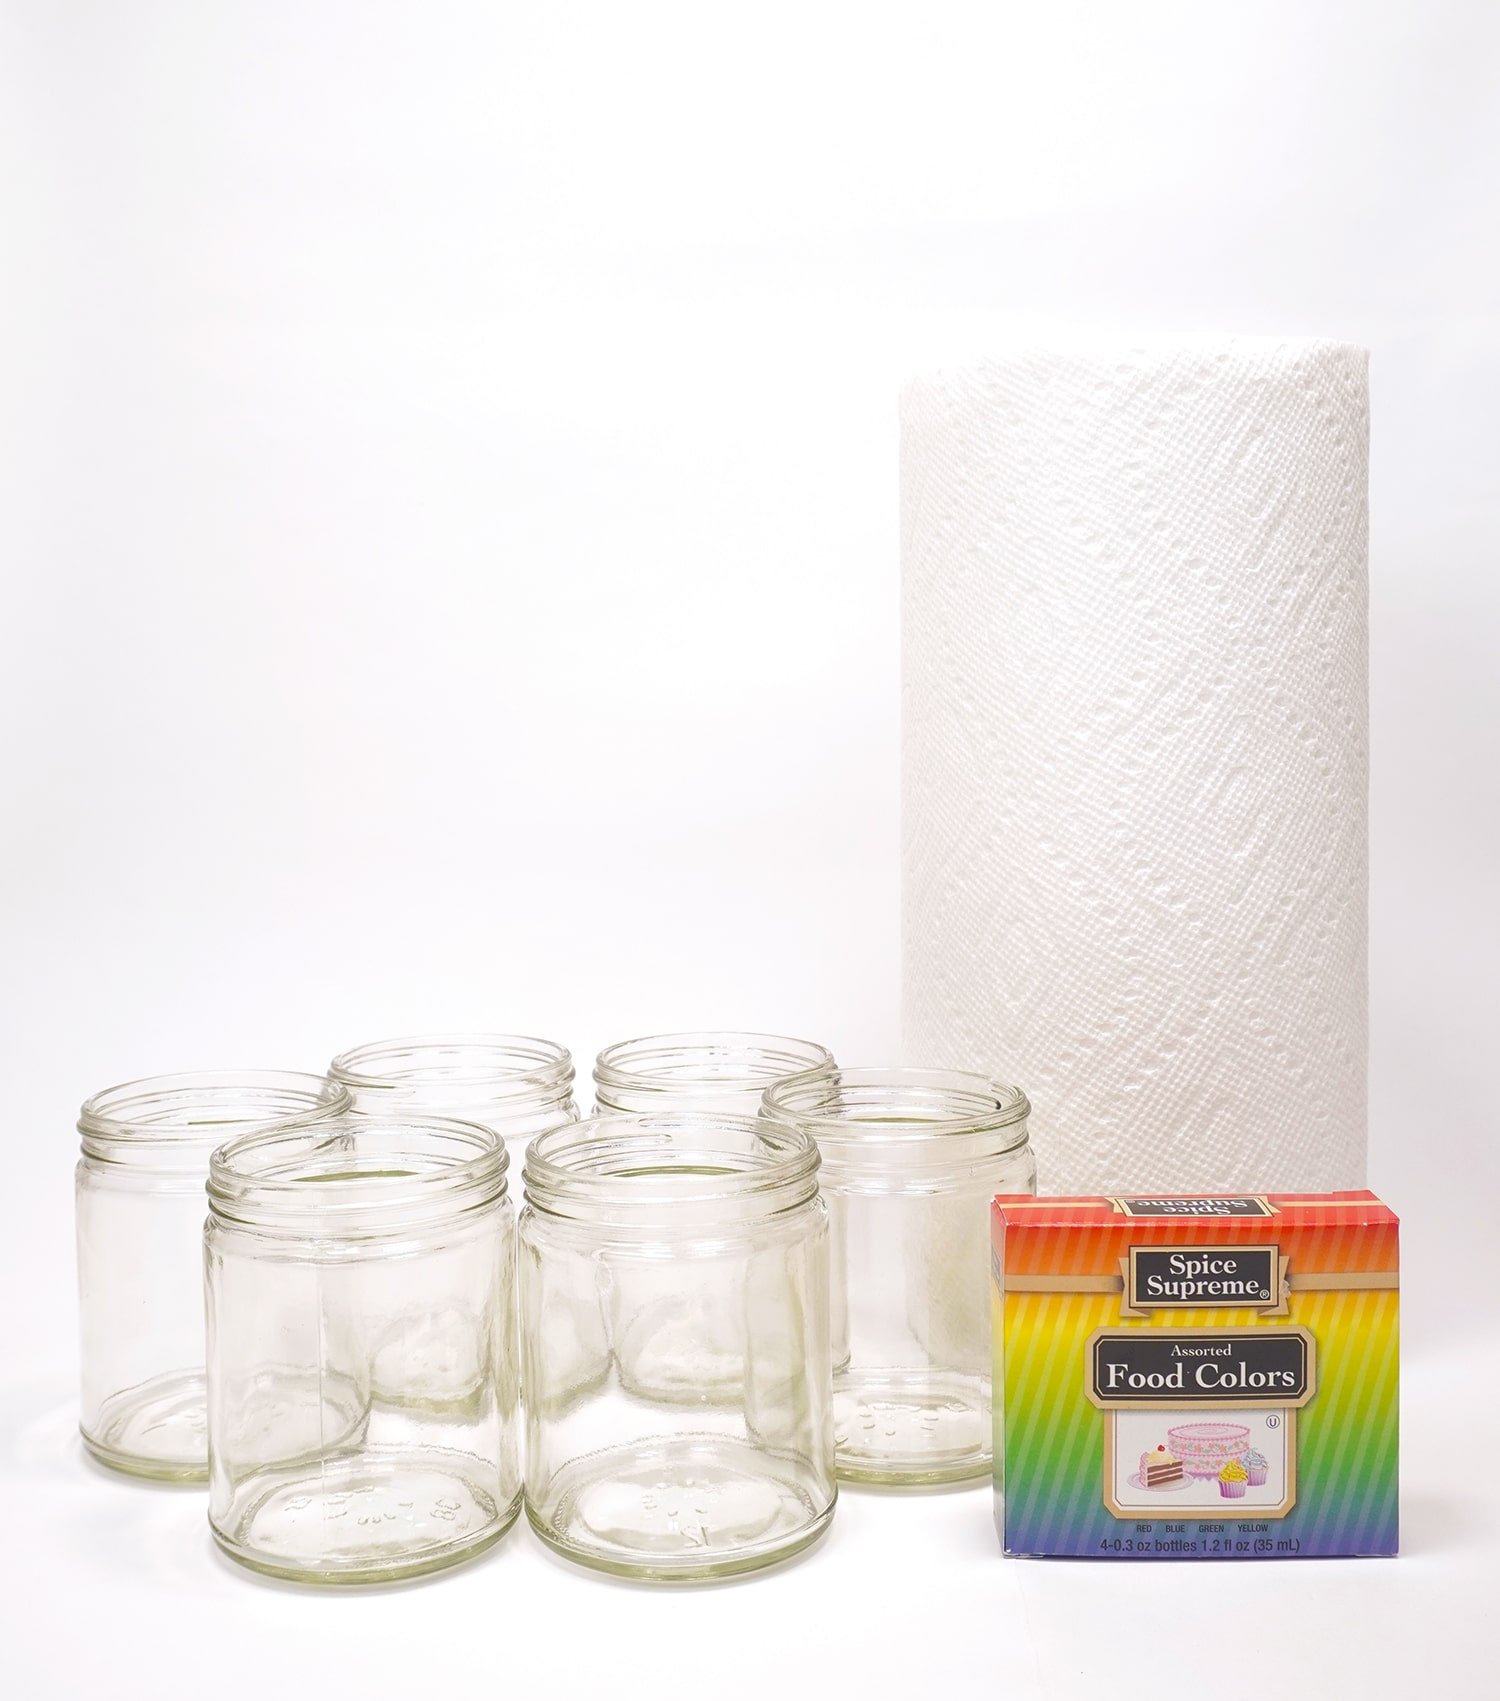 supplies to make a walking rainbow  (jars, paper towels, food coloring)